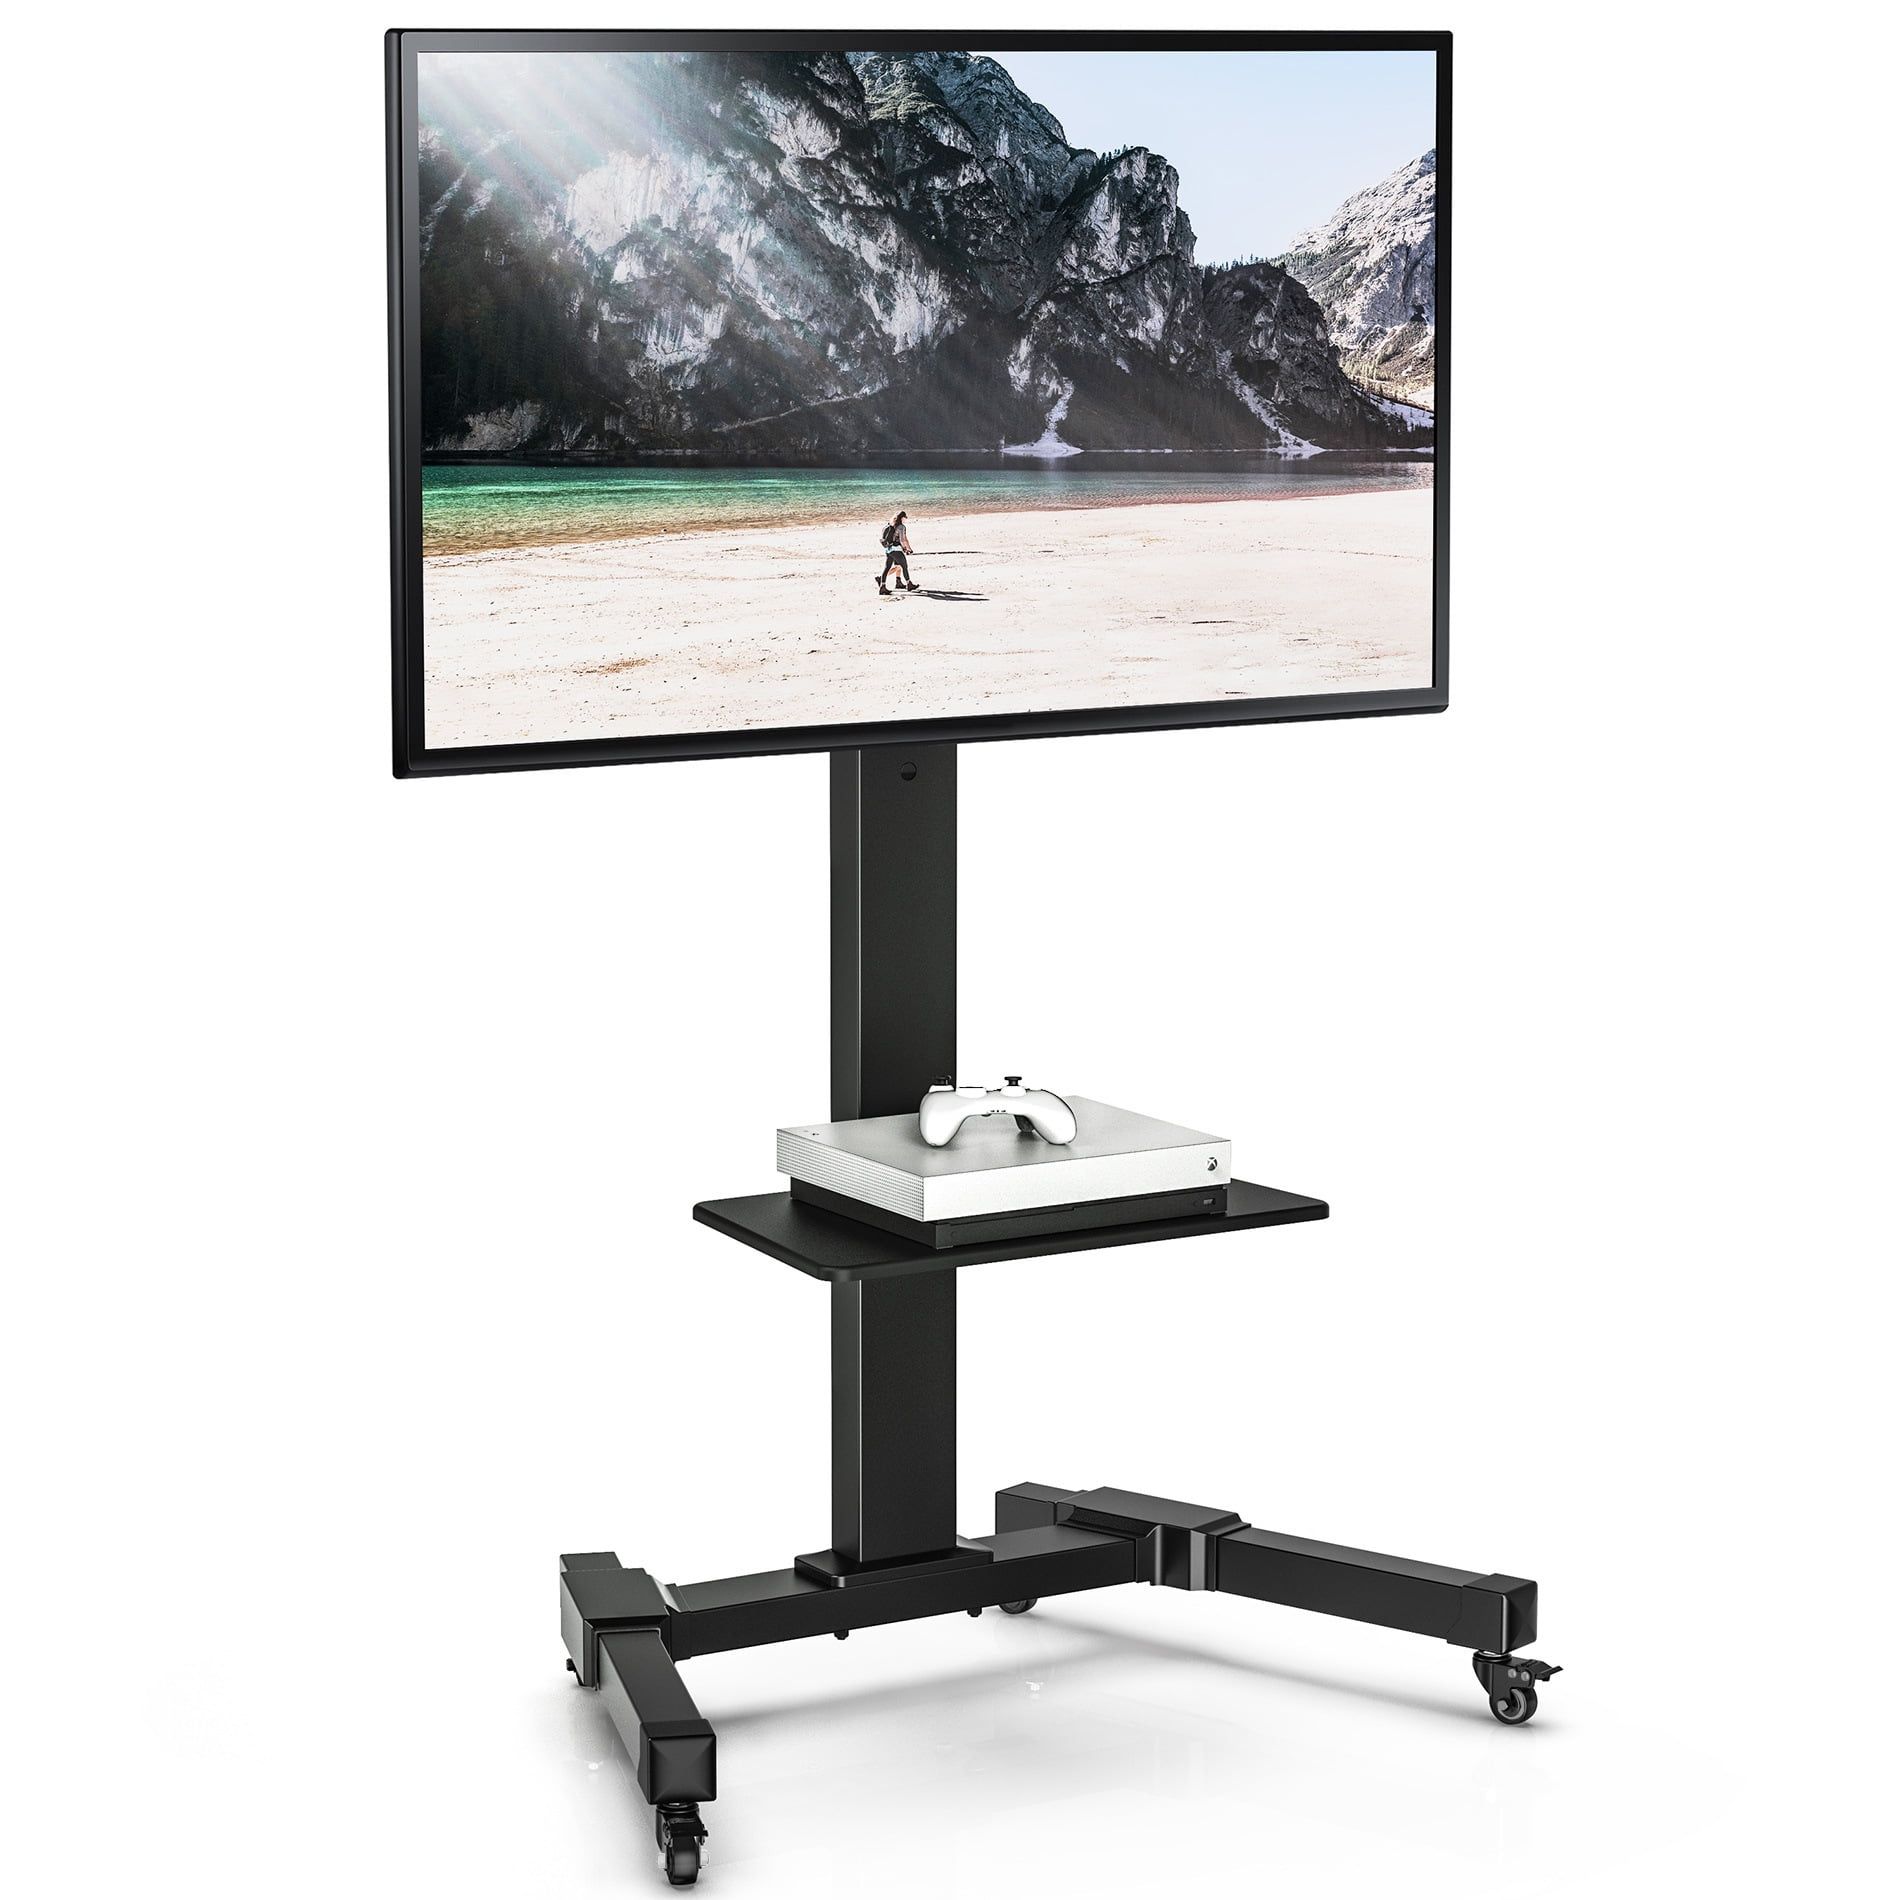 Fitueyes Mobile Swivel Tv Stand Trolley Height Adjustable For 32 To 70 In Mobile Tilt Rolling Tv Stands (View 11 of 20)